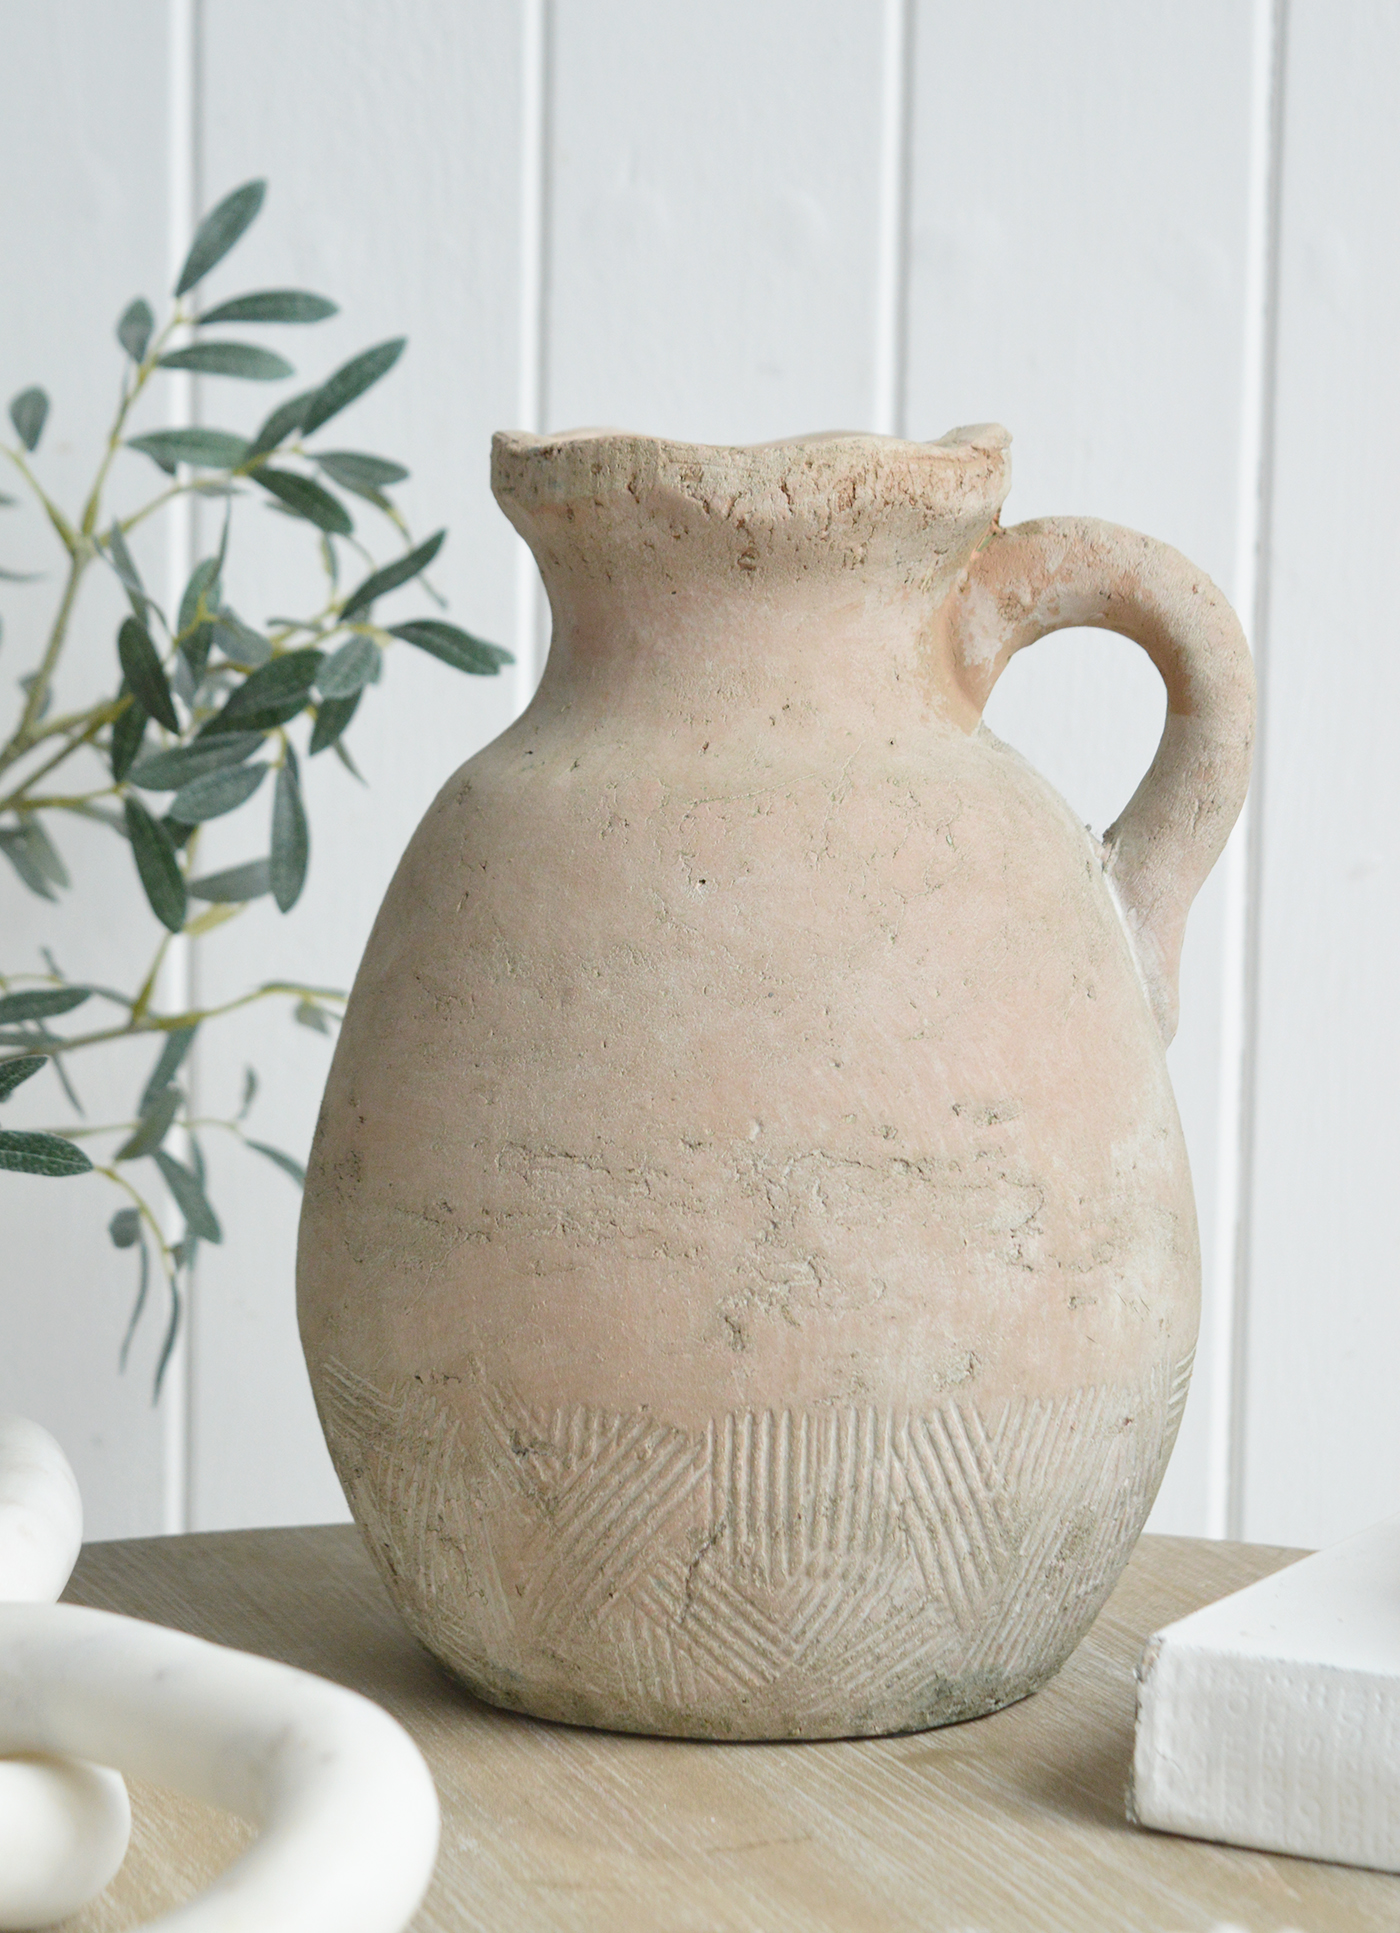 Etna Terracotta jug for New England, farmhouse,  Country and coastal homes and interior decor. Perfect to style shelves and consoles tables